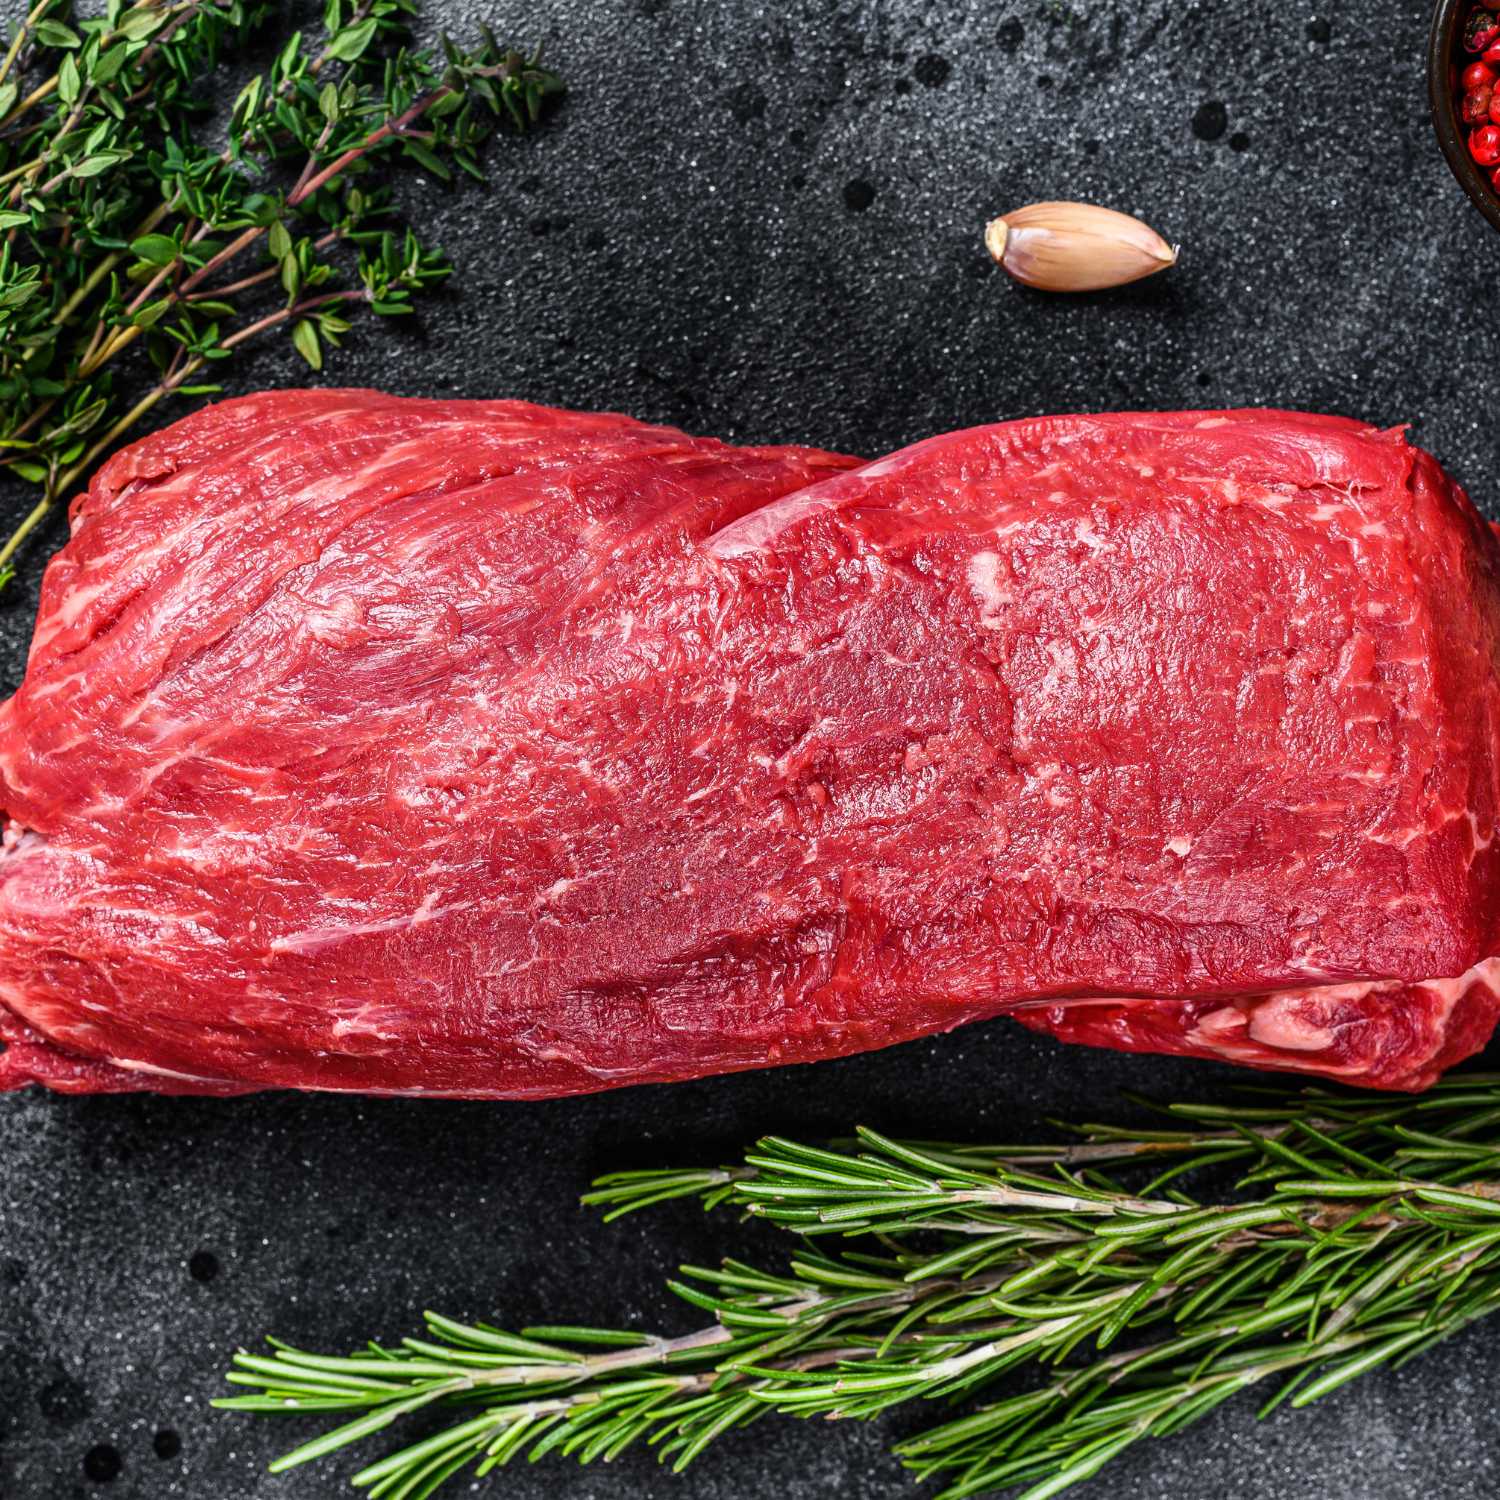 Sizzle Your Way to Gastronomic Delights: Preparing Grass-Fed Beef Like a Meat King in Hong Kong